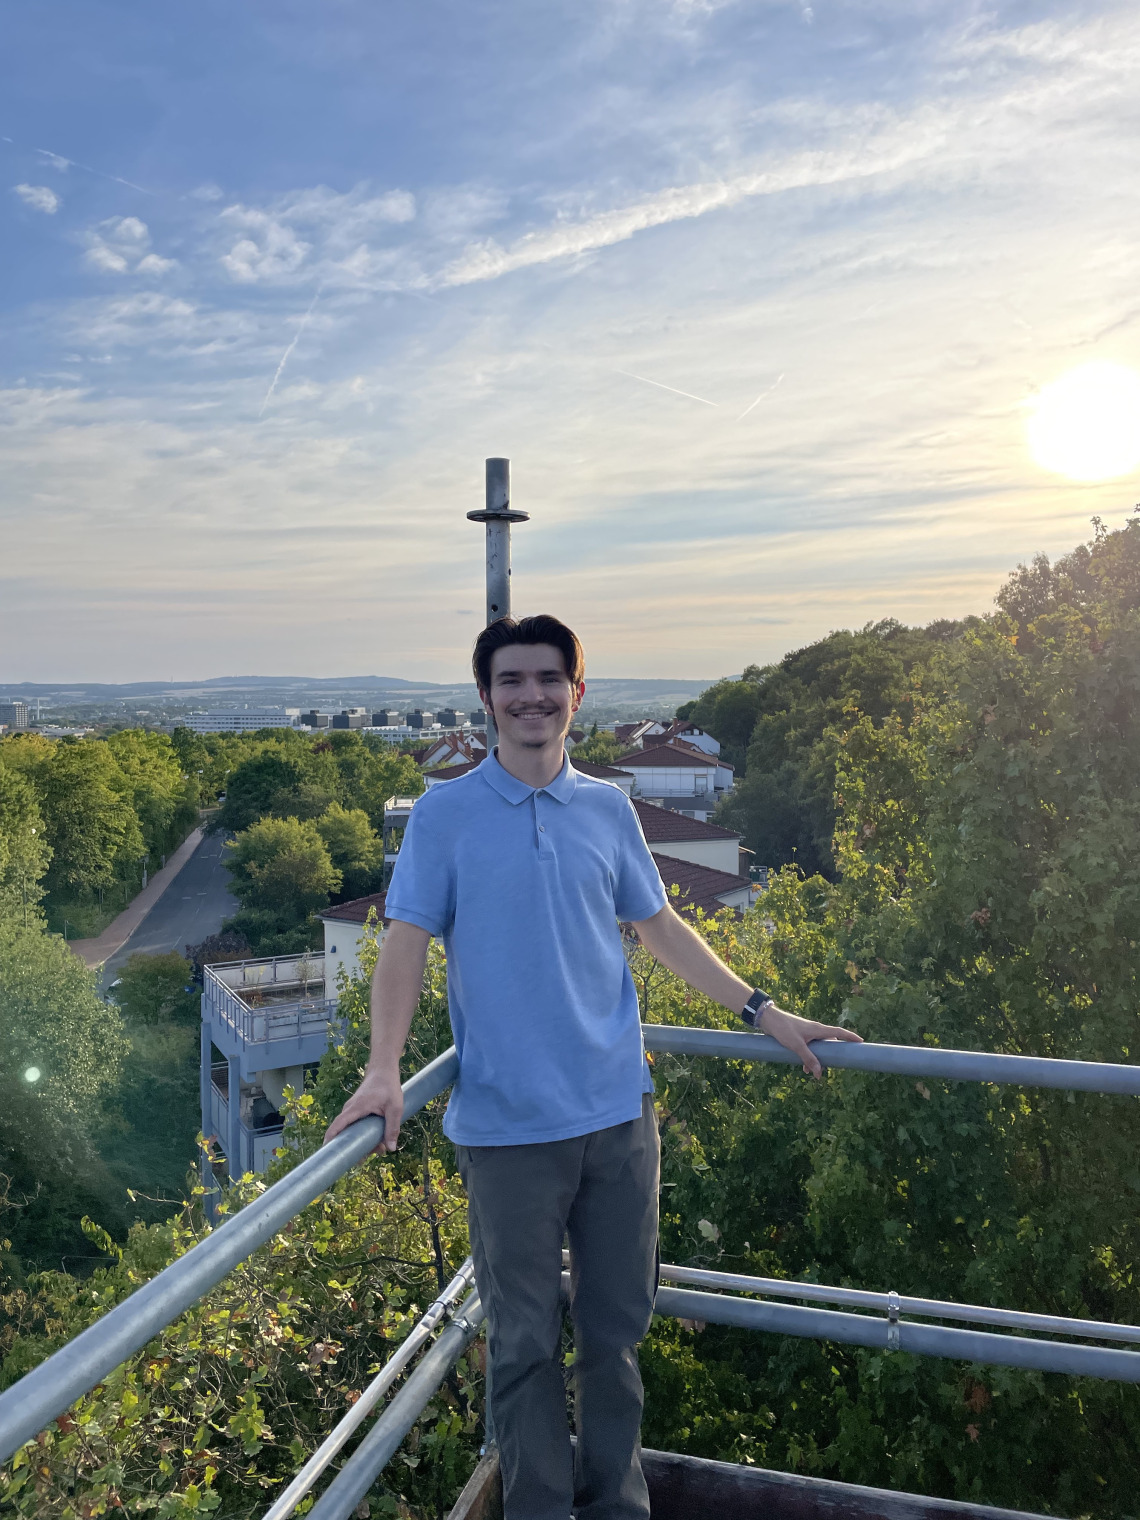 Jacob standing at a view point with a very green background. The sky in the background is blue with warm tones and looks like the sun is about to set. He is wearing a collared shirt with slacks.